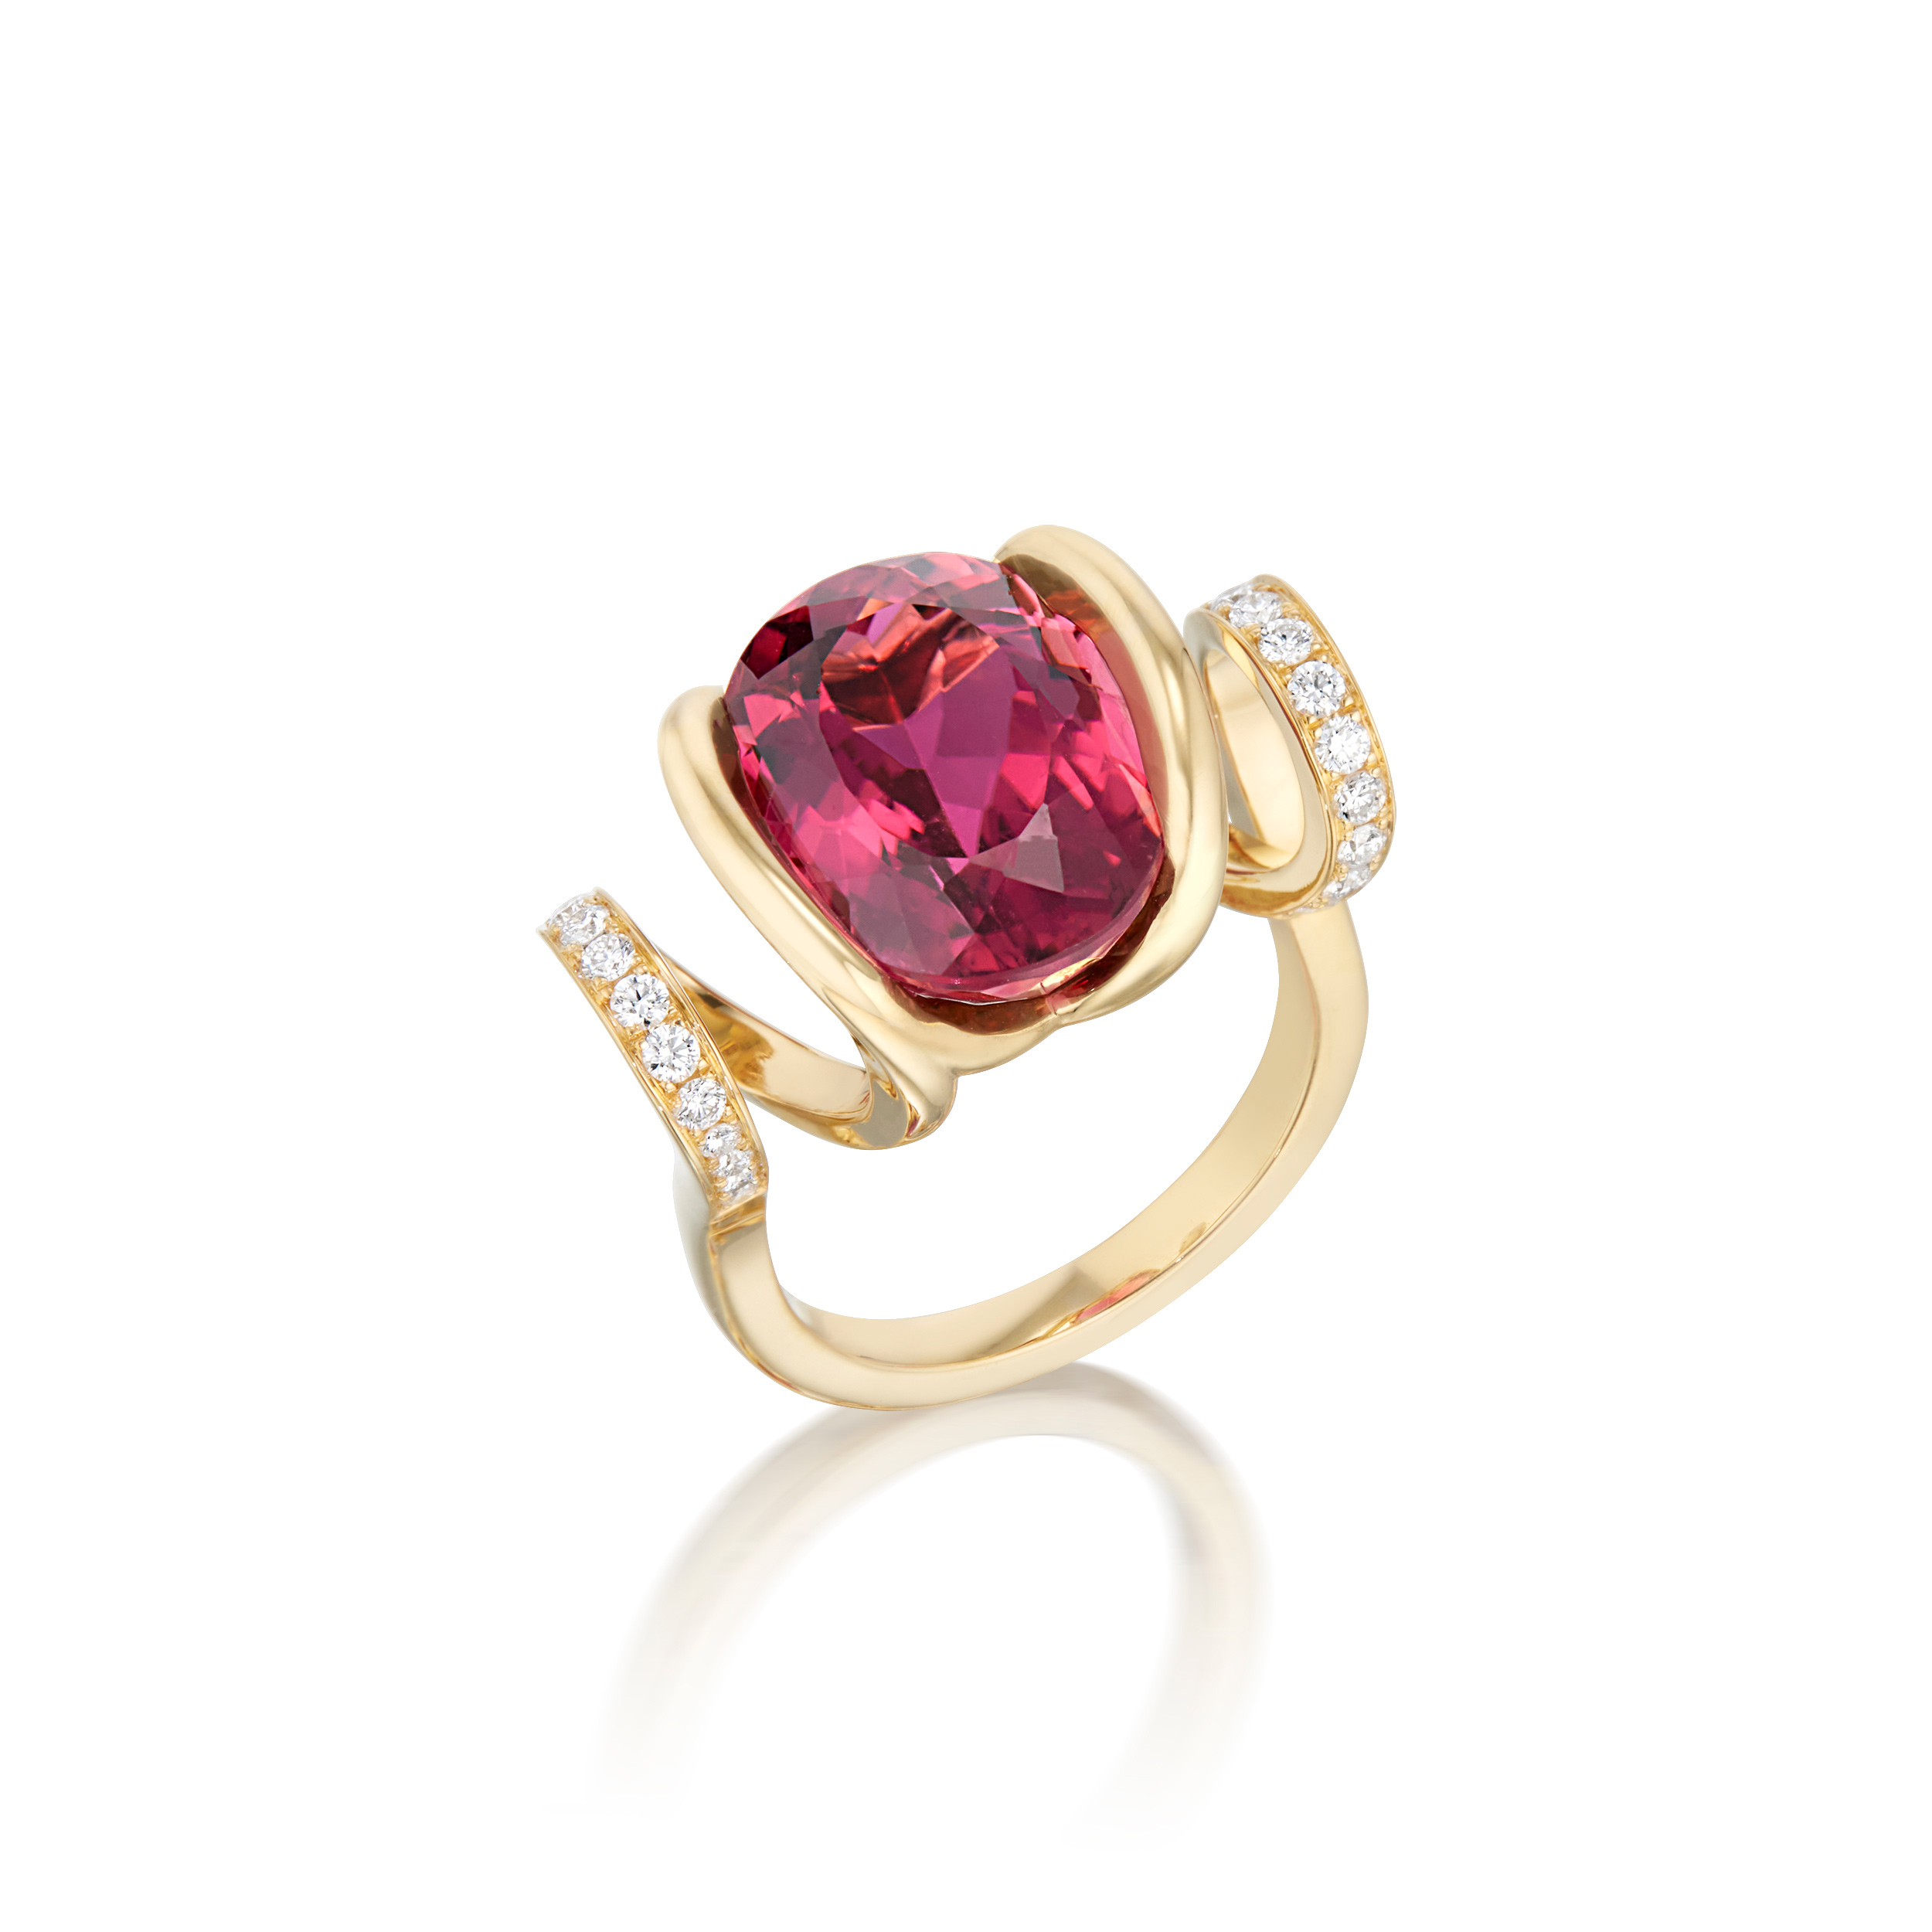 This is a top view of the Renisis Fire Curl Ring with pink tourmaline center and 18K yellow gold with pavé diamonds. Its unique design features a curled gold body and setting.